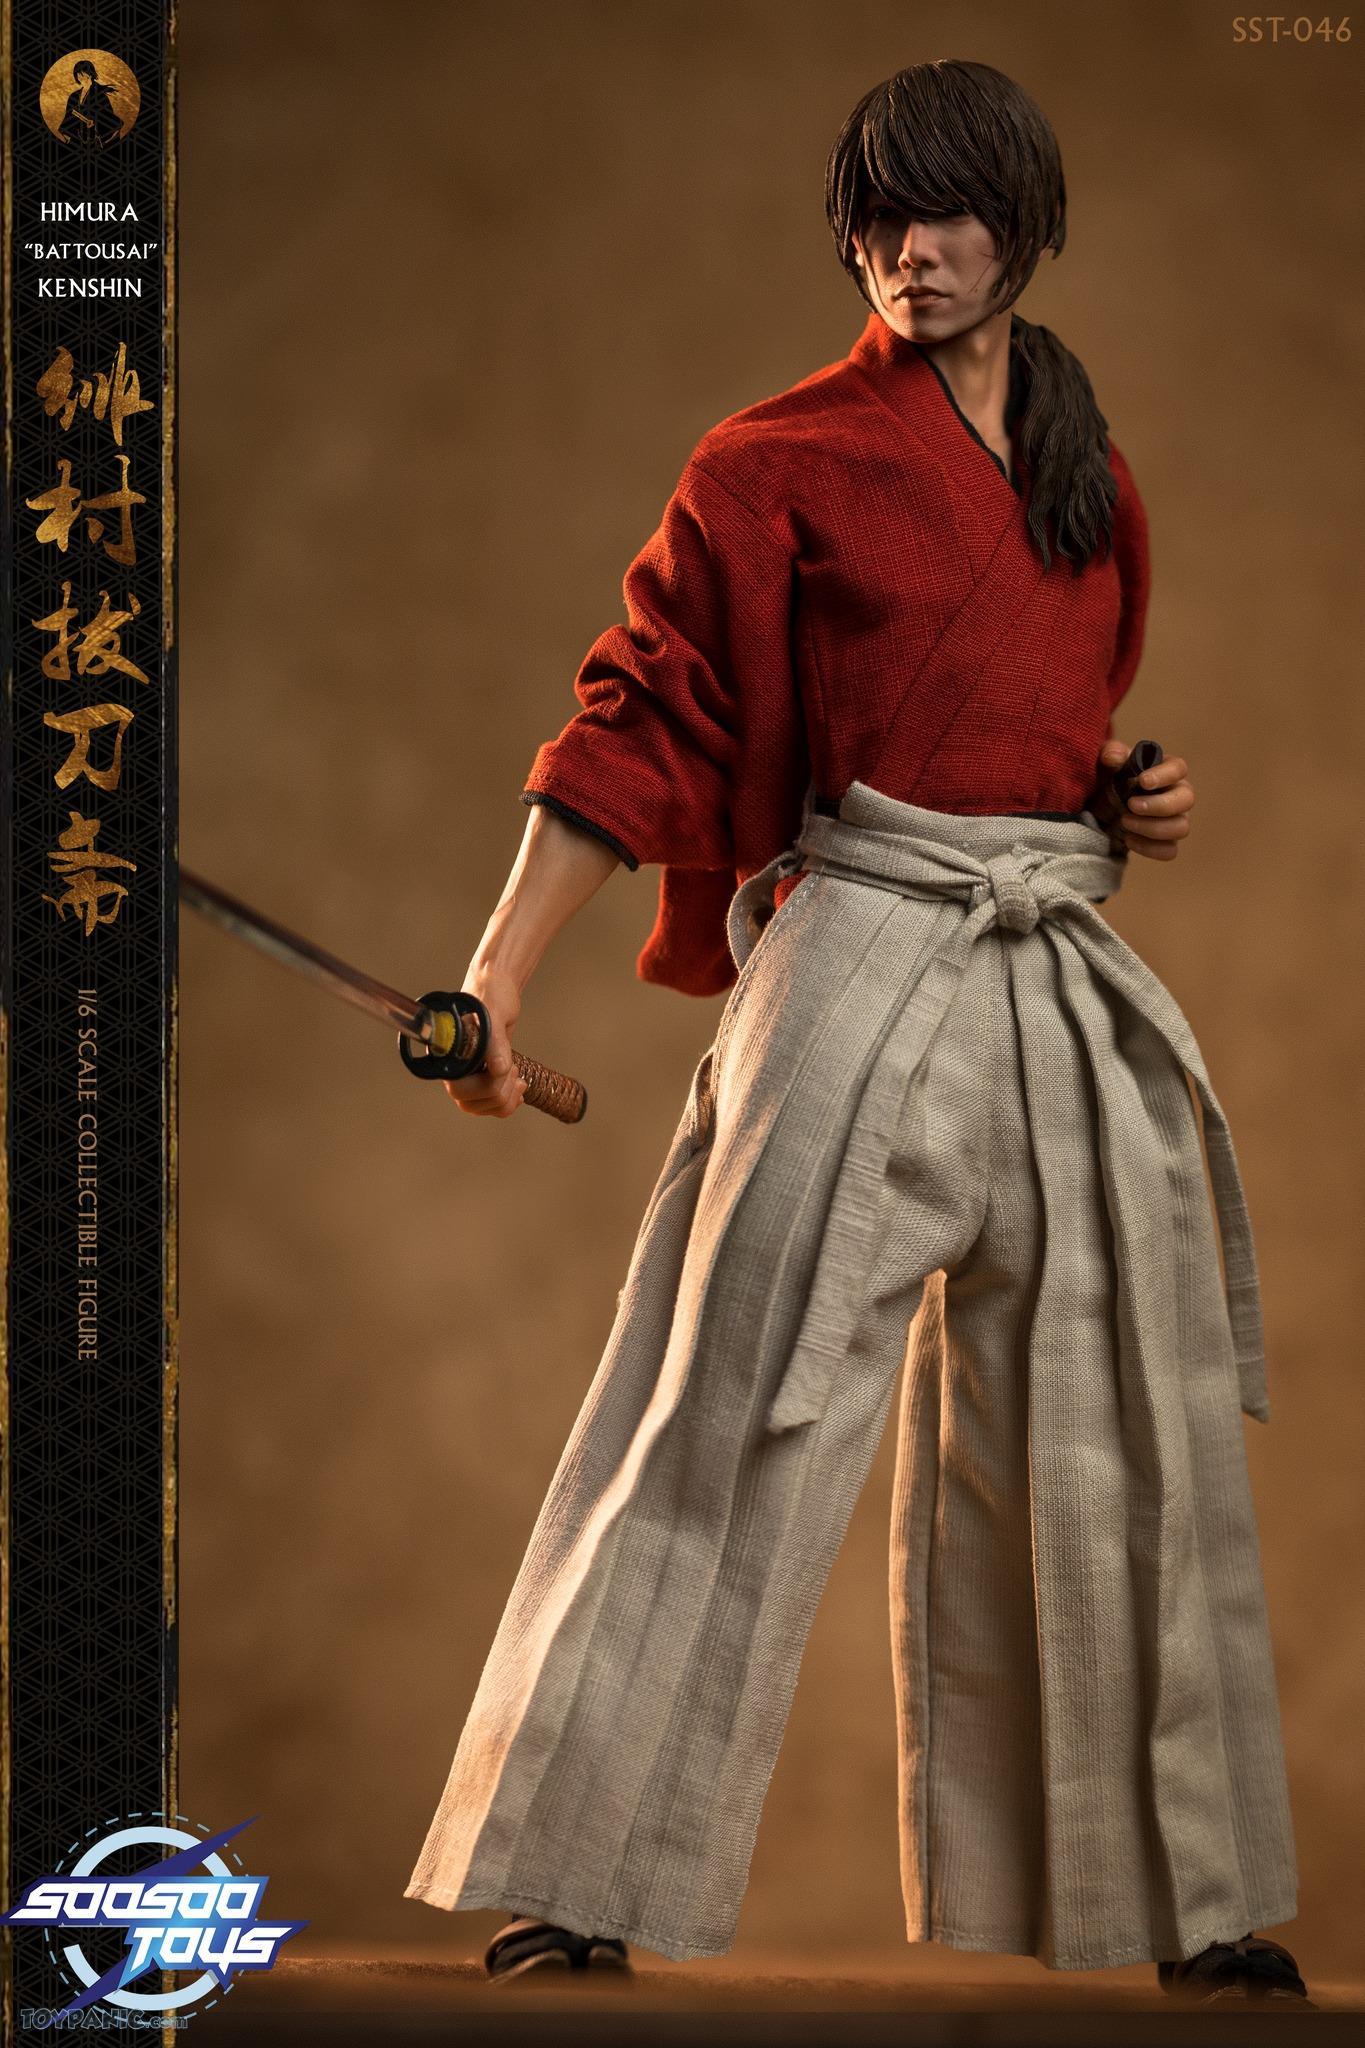 kenshin - NEW PRODUCT: 1/6 scale Rurouni Kenshin Collectible Figure from SooSooToys 712202251232PM_7300100